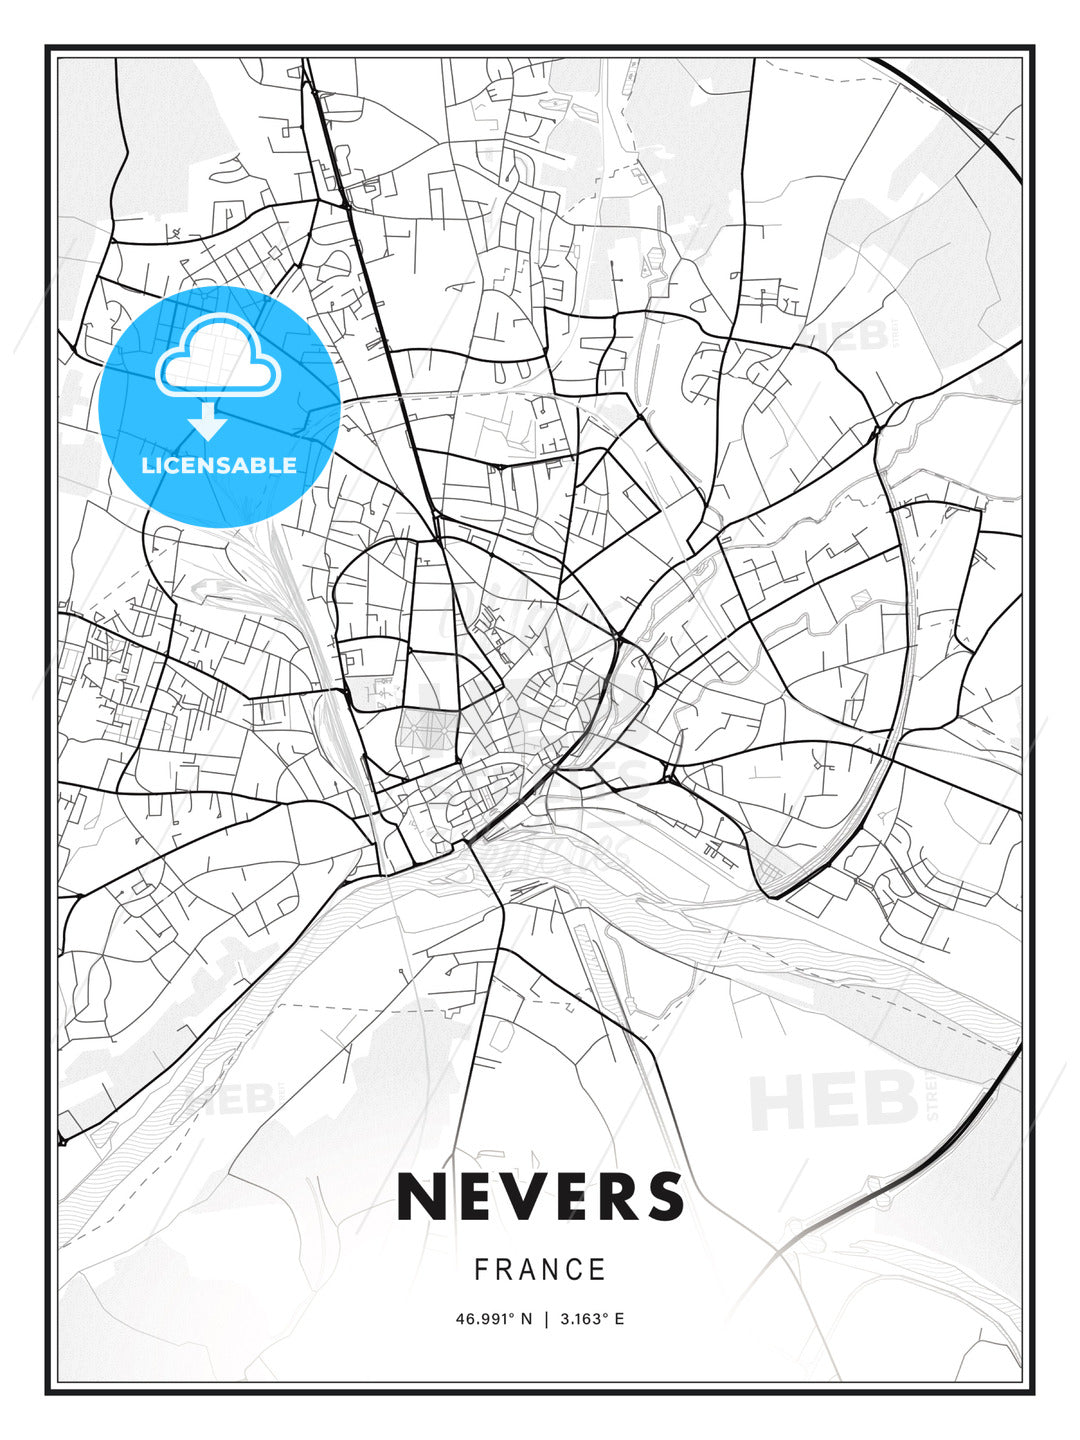 Nevers, France, Modern Print Template in Various Formats - HEBSTREITS Sketches